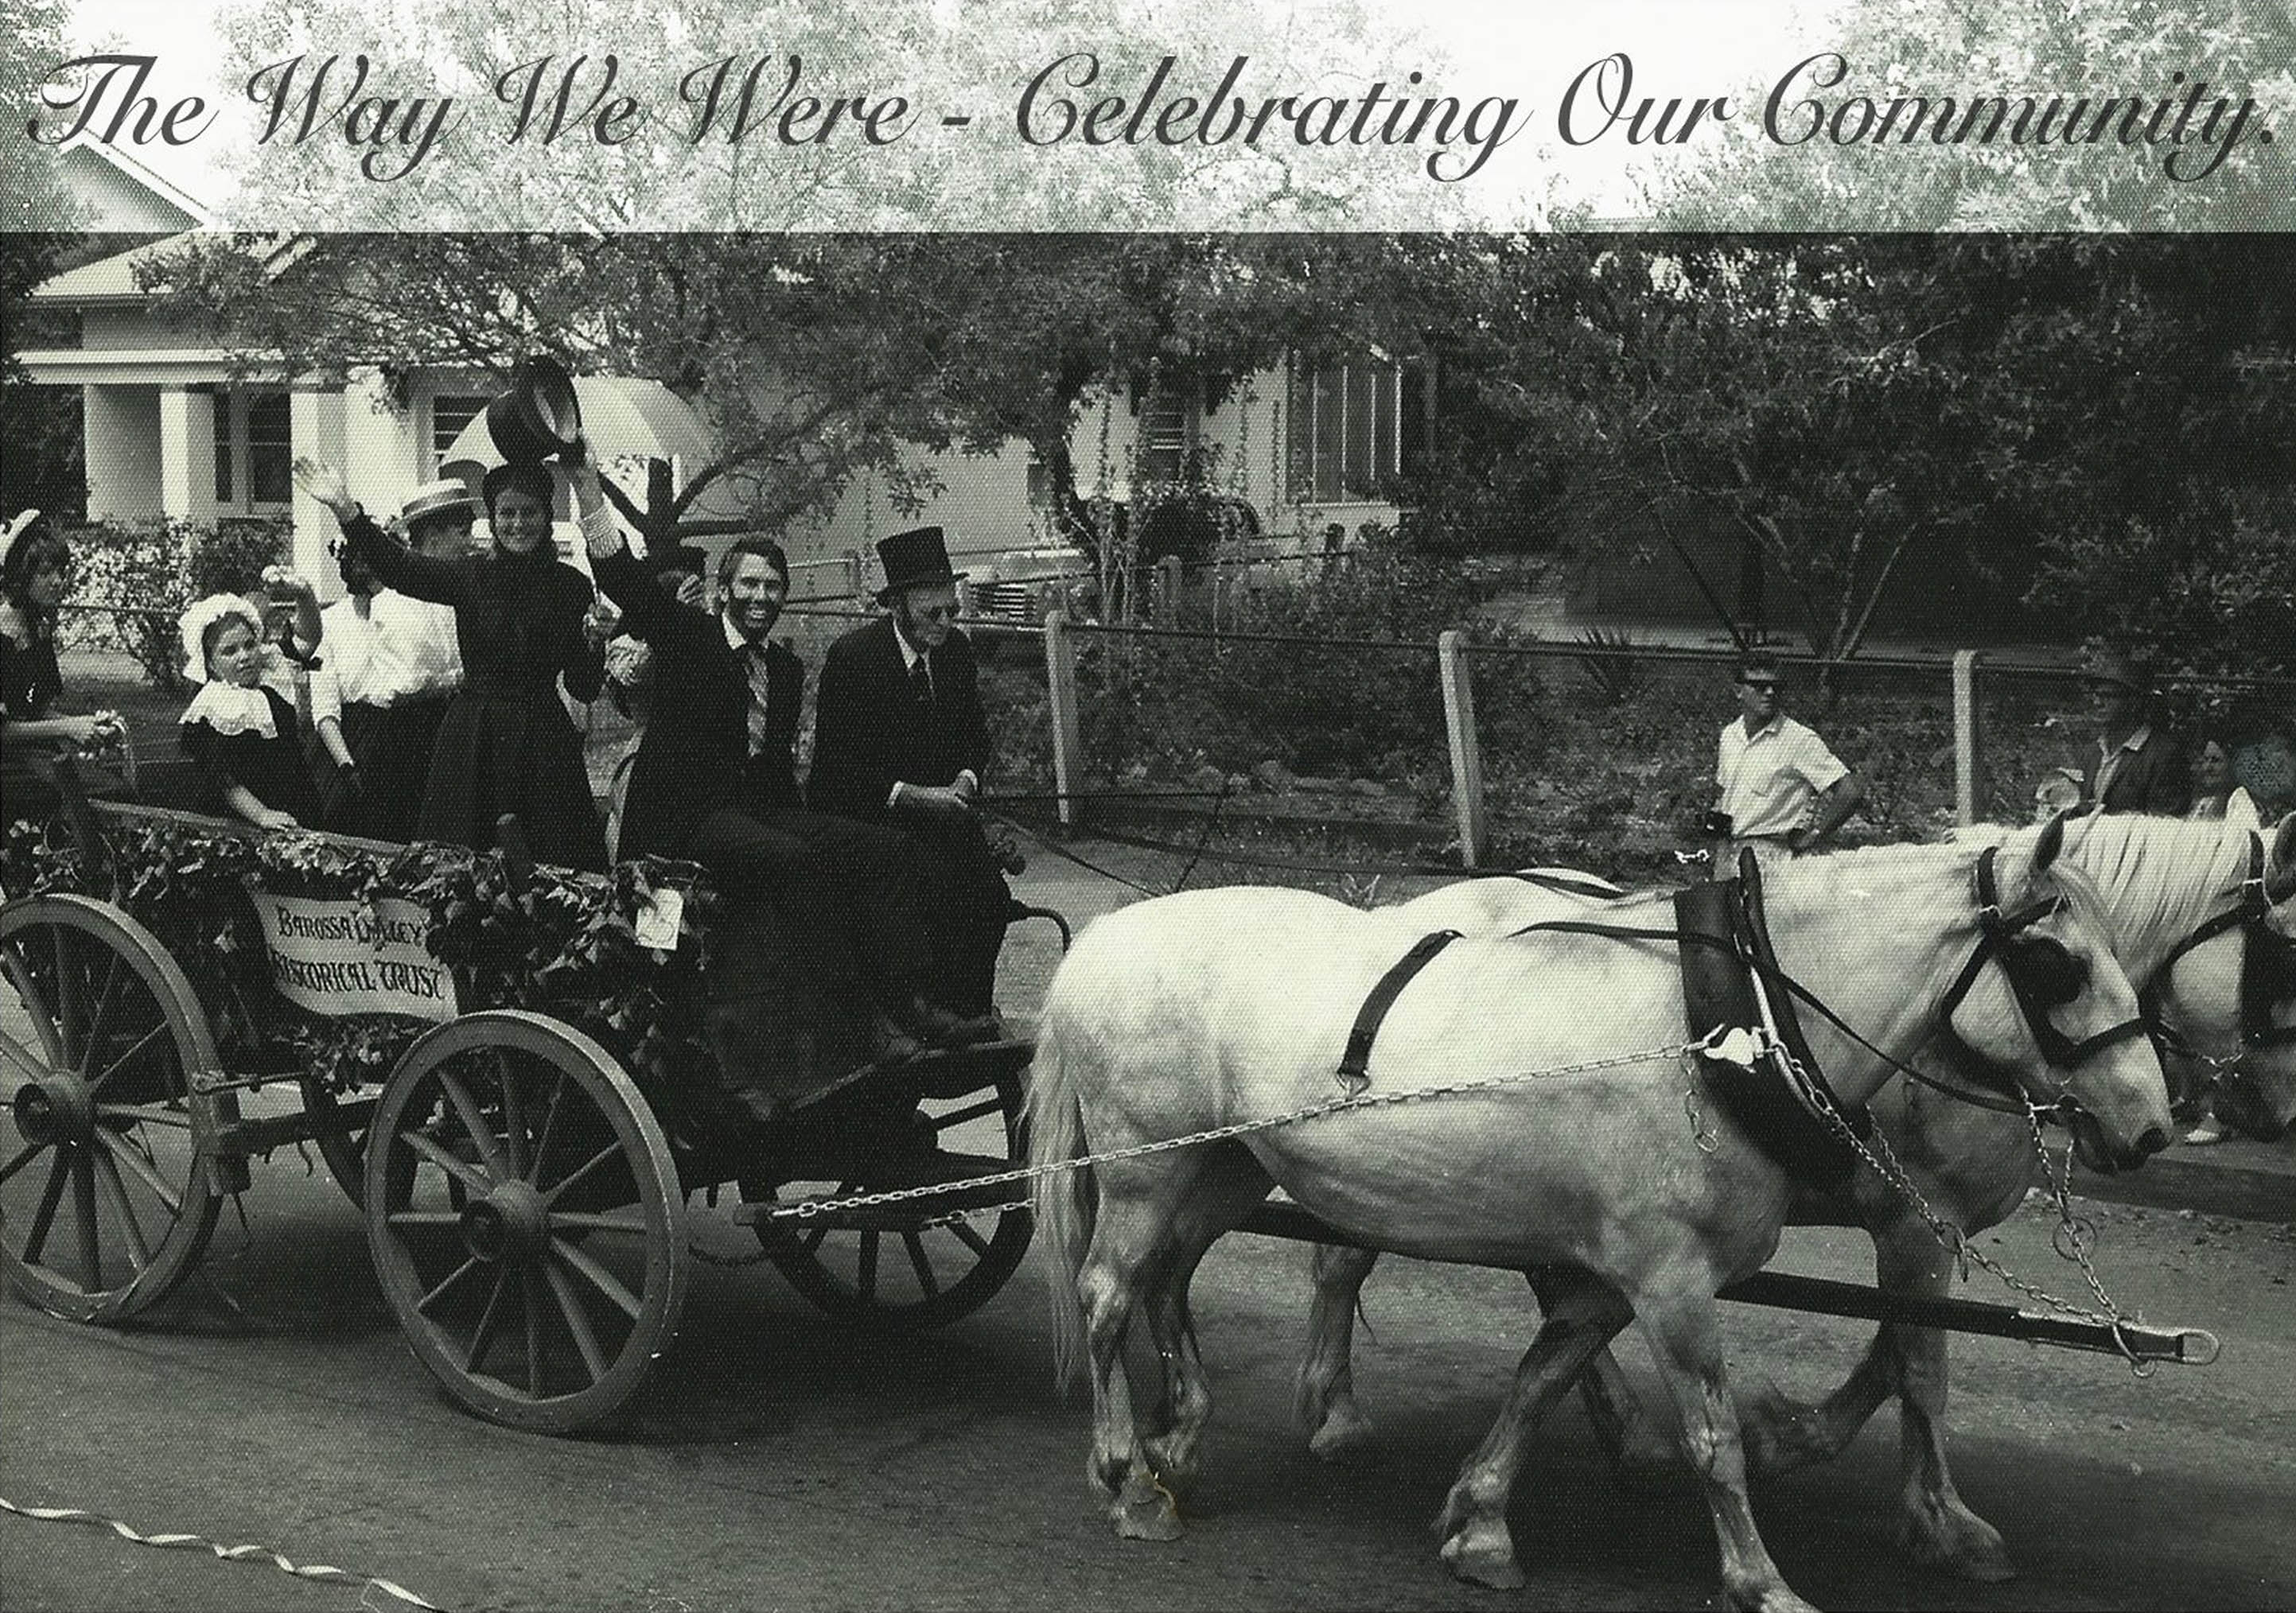 The History of G Gramp and Sons - Colin Gramp - The Way We Were - Celebrating Our Community